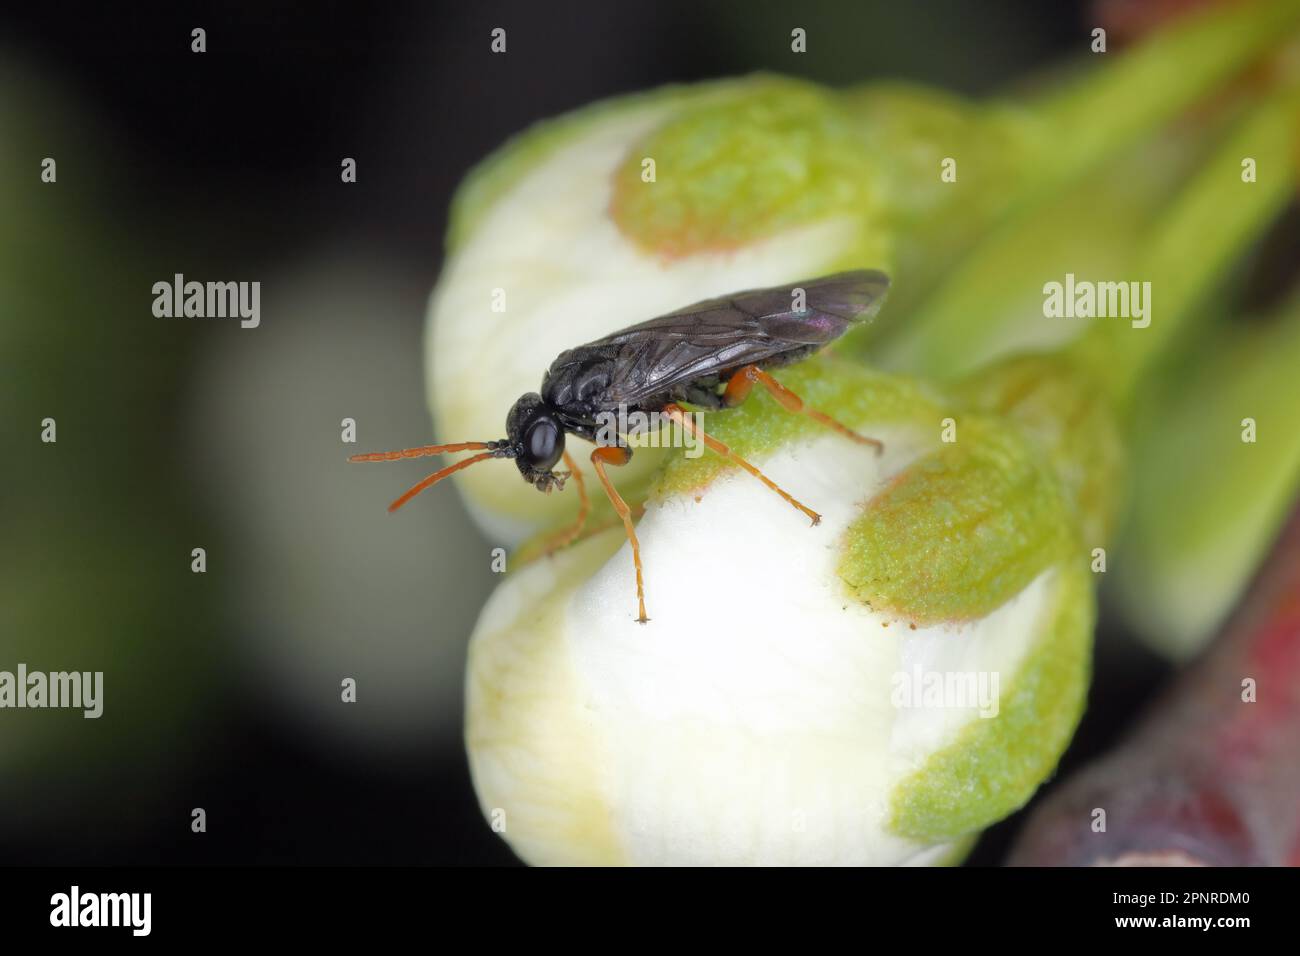 Plum fruit sawfly or plum sawfly or black plum sawfly (Hoplocampa minuta). Larvae bore in the unripe fruits. An important pest of plum trees. Stock Photo